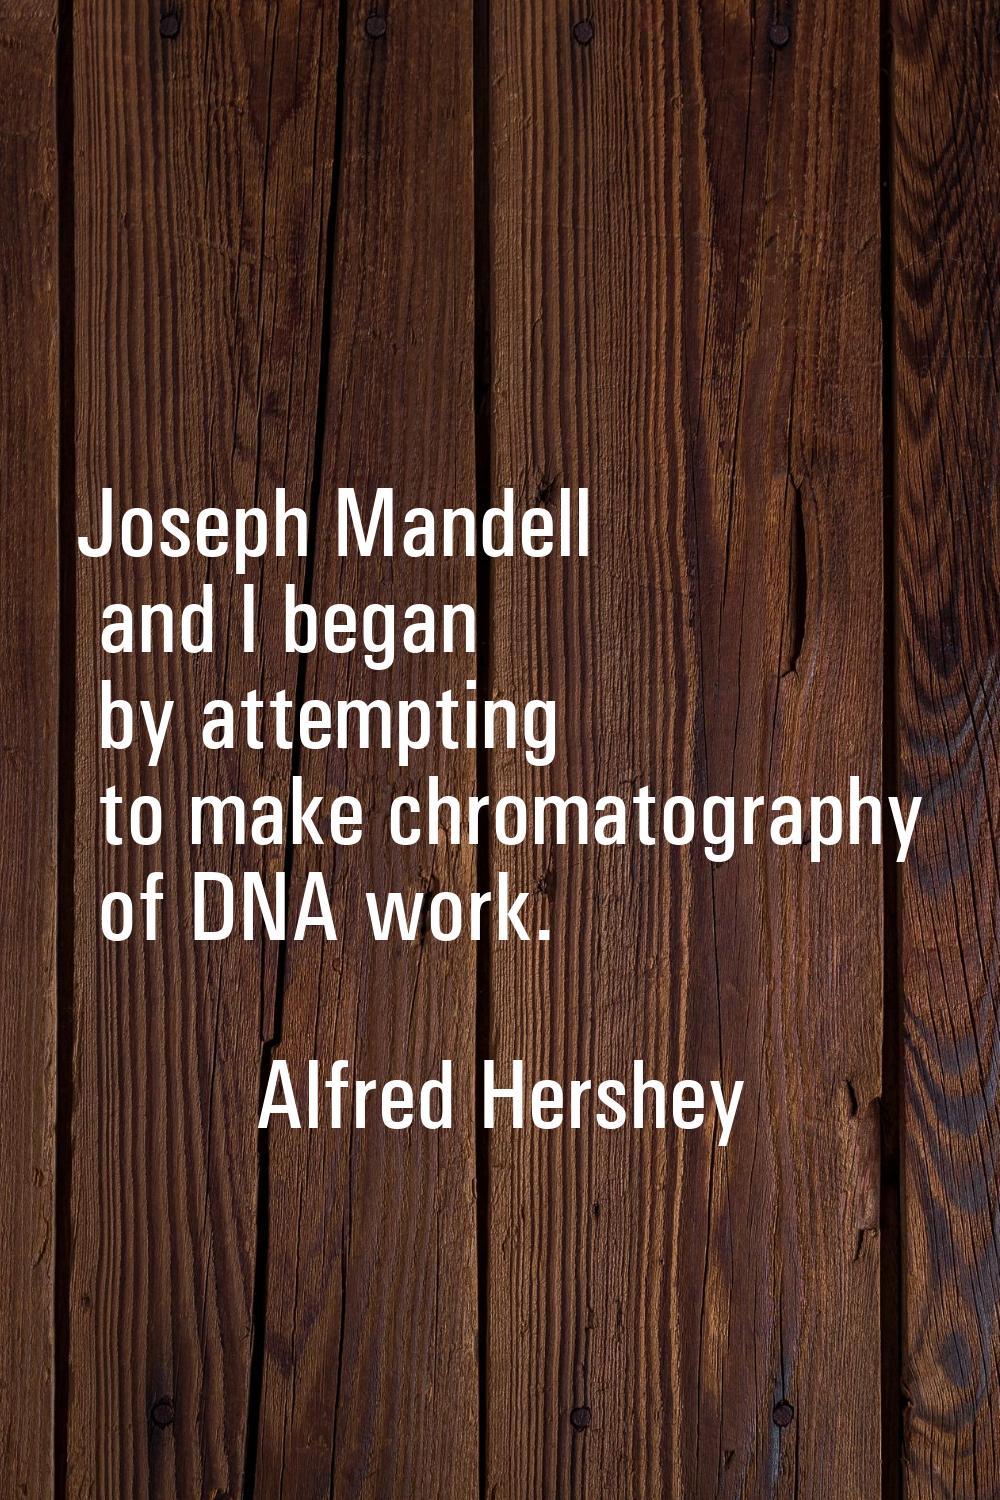 Joseph Mandell and I began by attempting to make chromatography of DNA work.